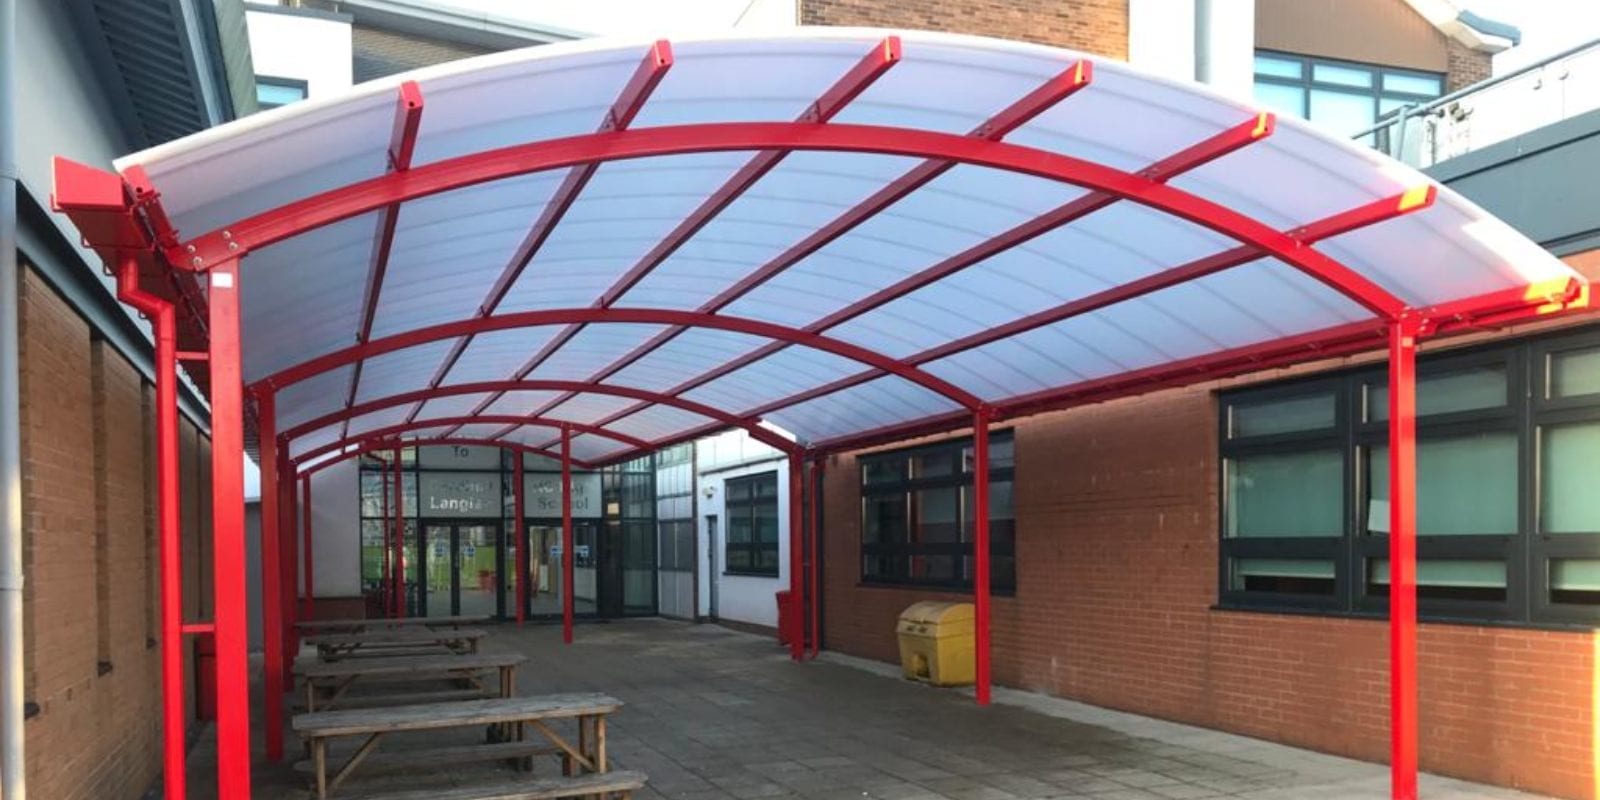 Dining shelter we designed for Cardinal Langley RC High School